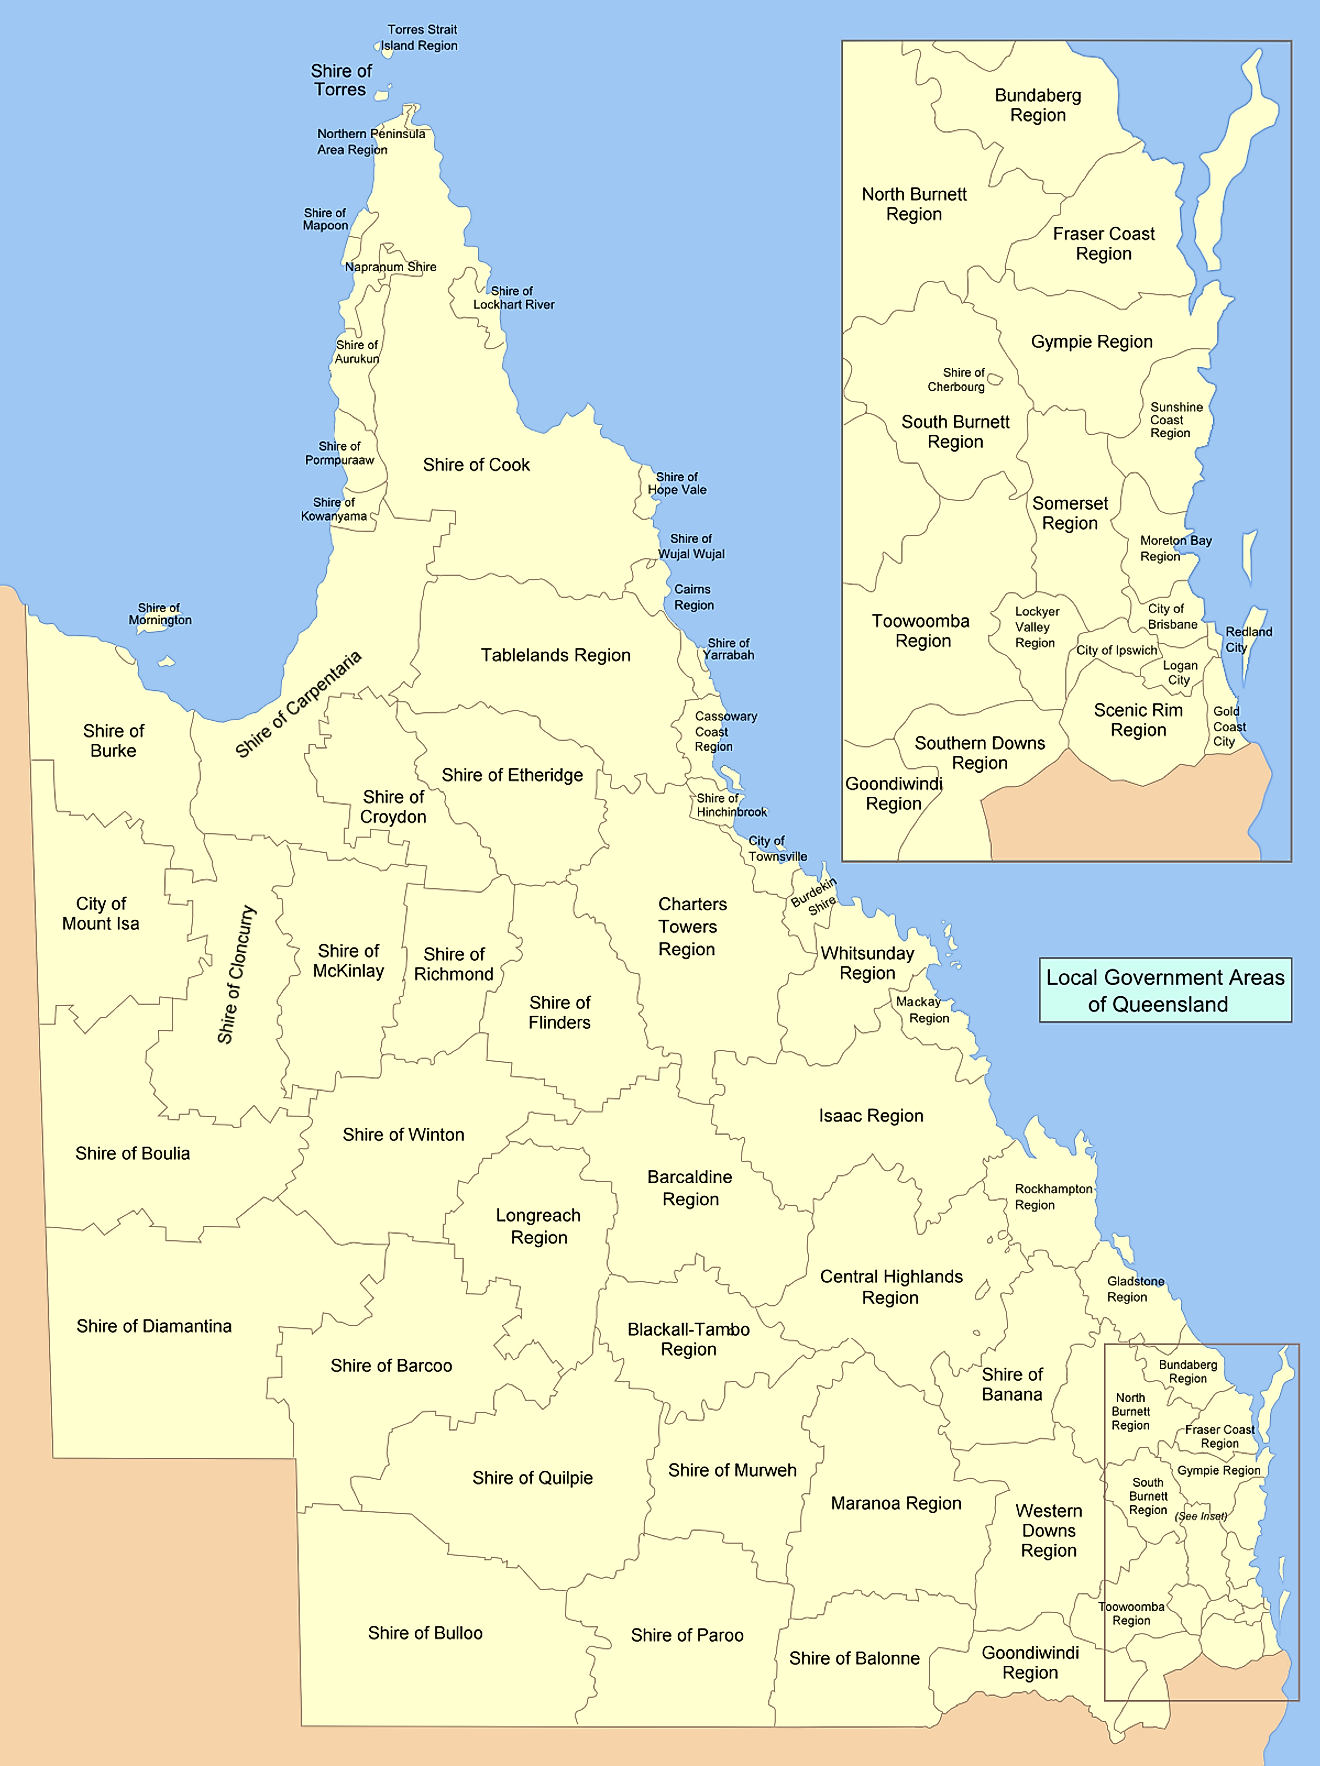 Administrative Map of Queensland showing its local government areas.